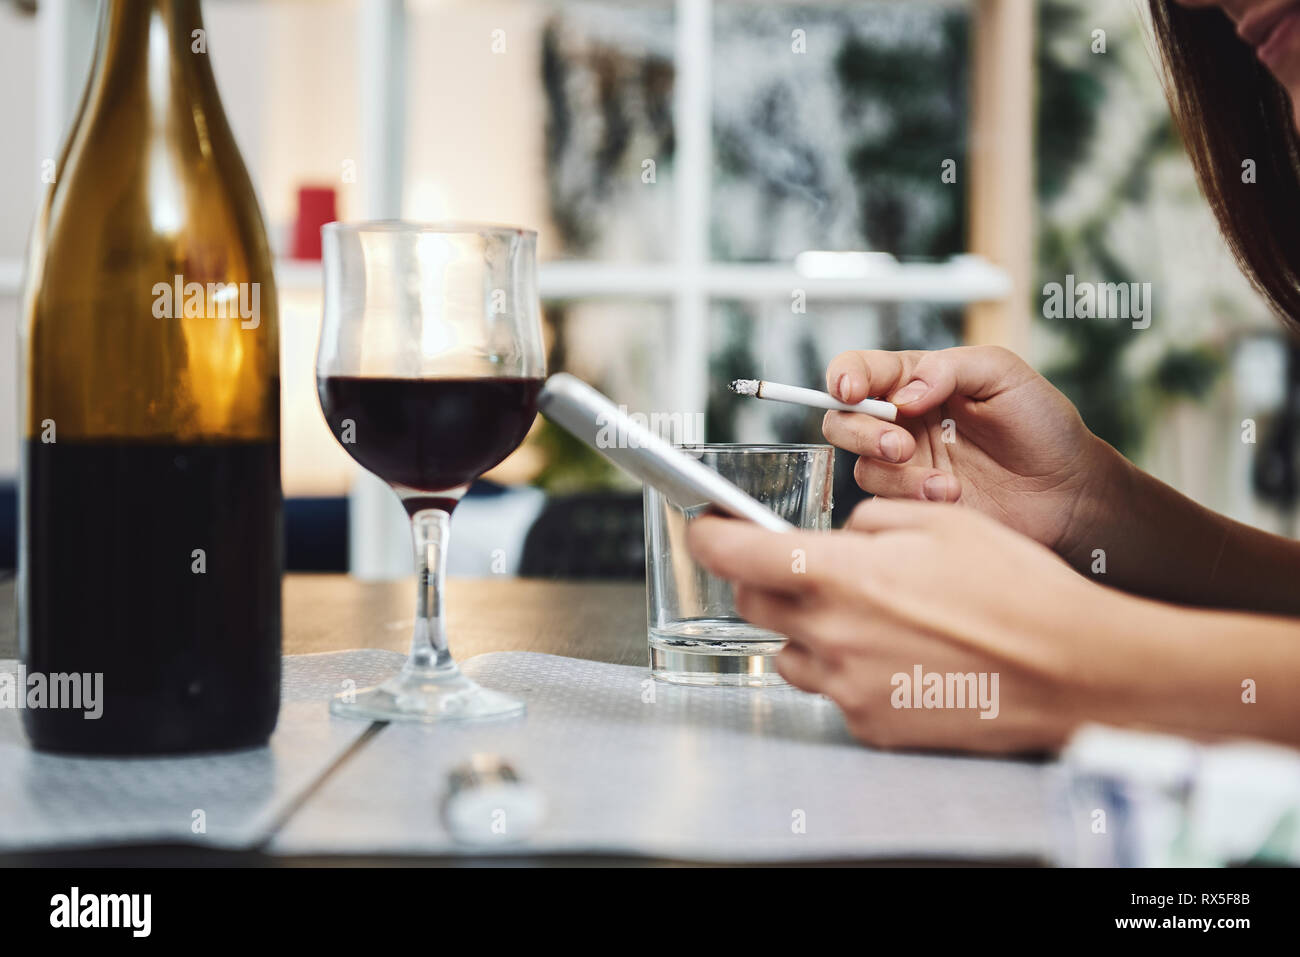 Woman holds a cigarette in one hand, a phone in another. Using of empty glass as an ashtray. A bottle and glass of red wine are on the table. Stock Photo